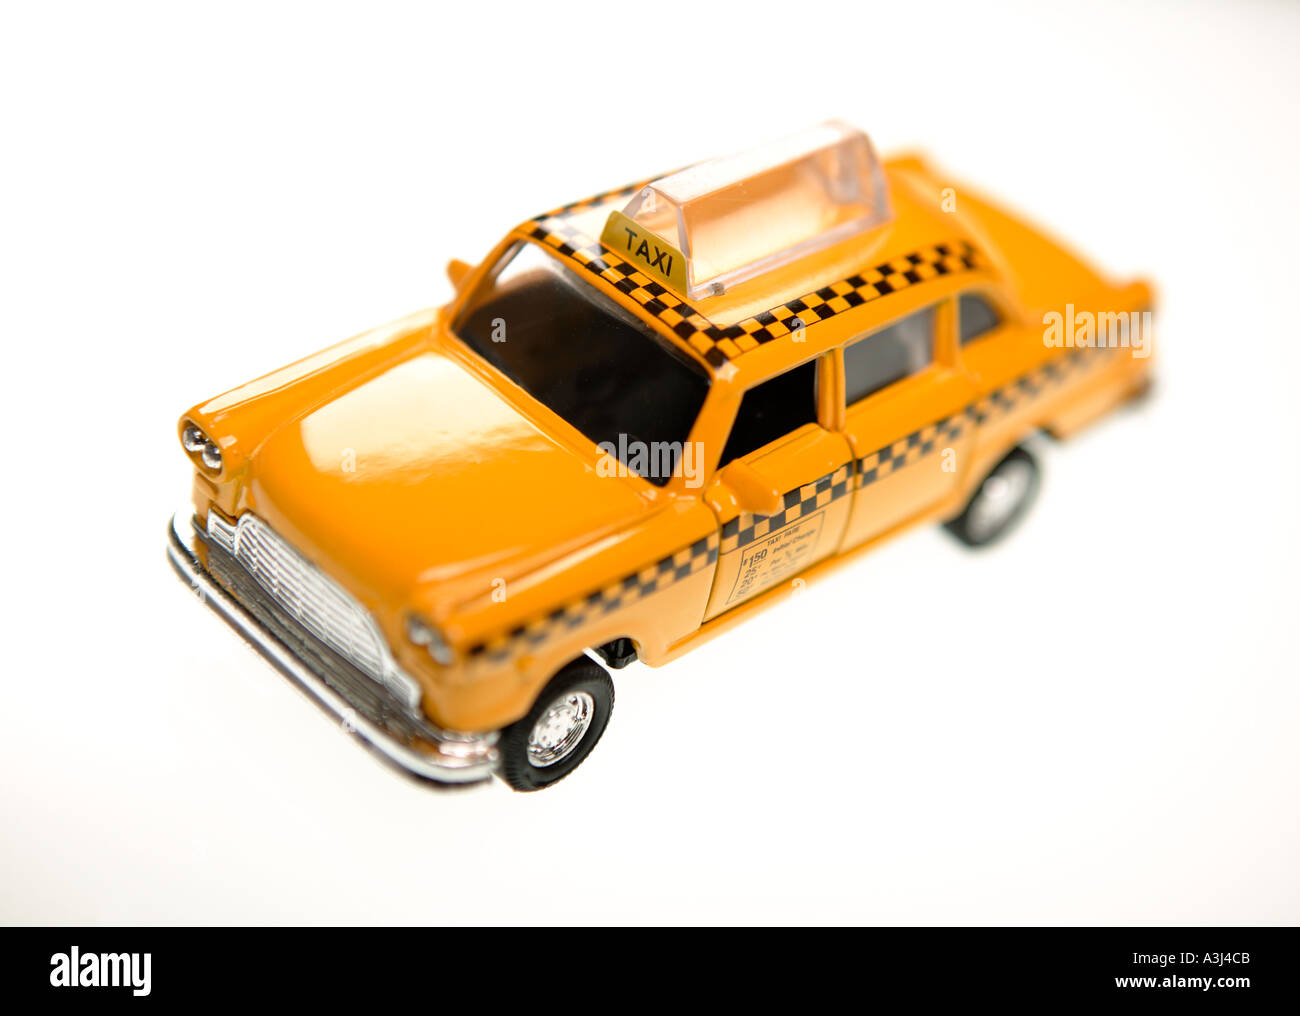 MODEL OF NEW YORK YELLOW TAXI CAB ON WHITE BACKGROUND Stock Photo